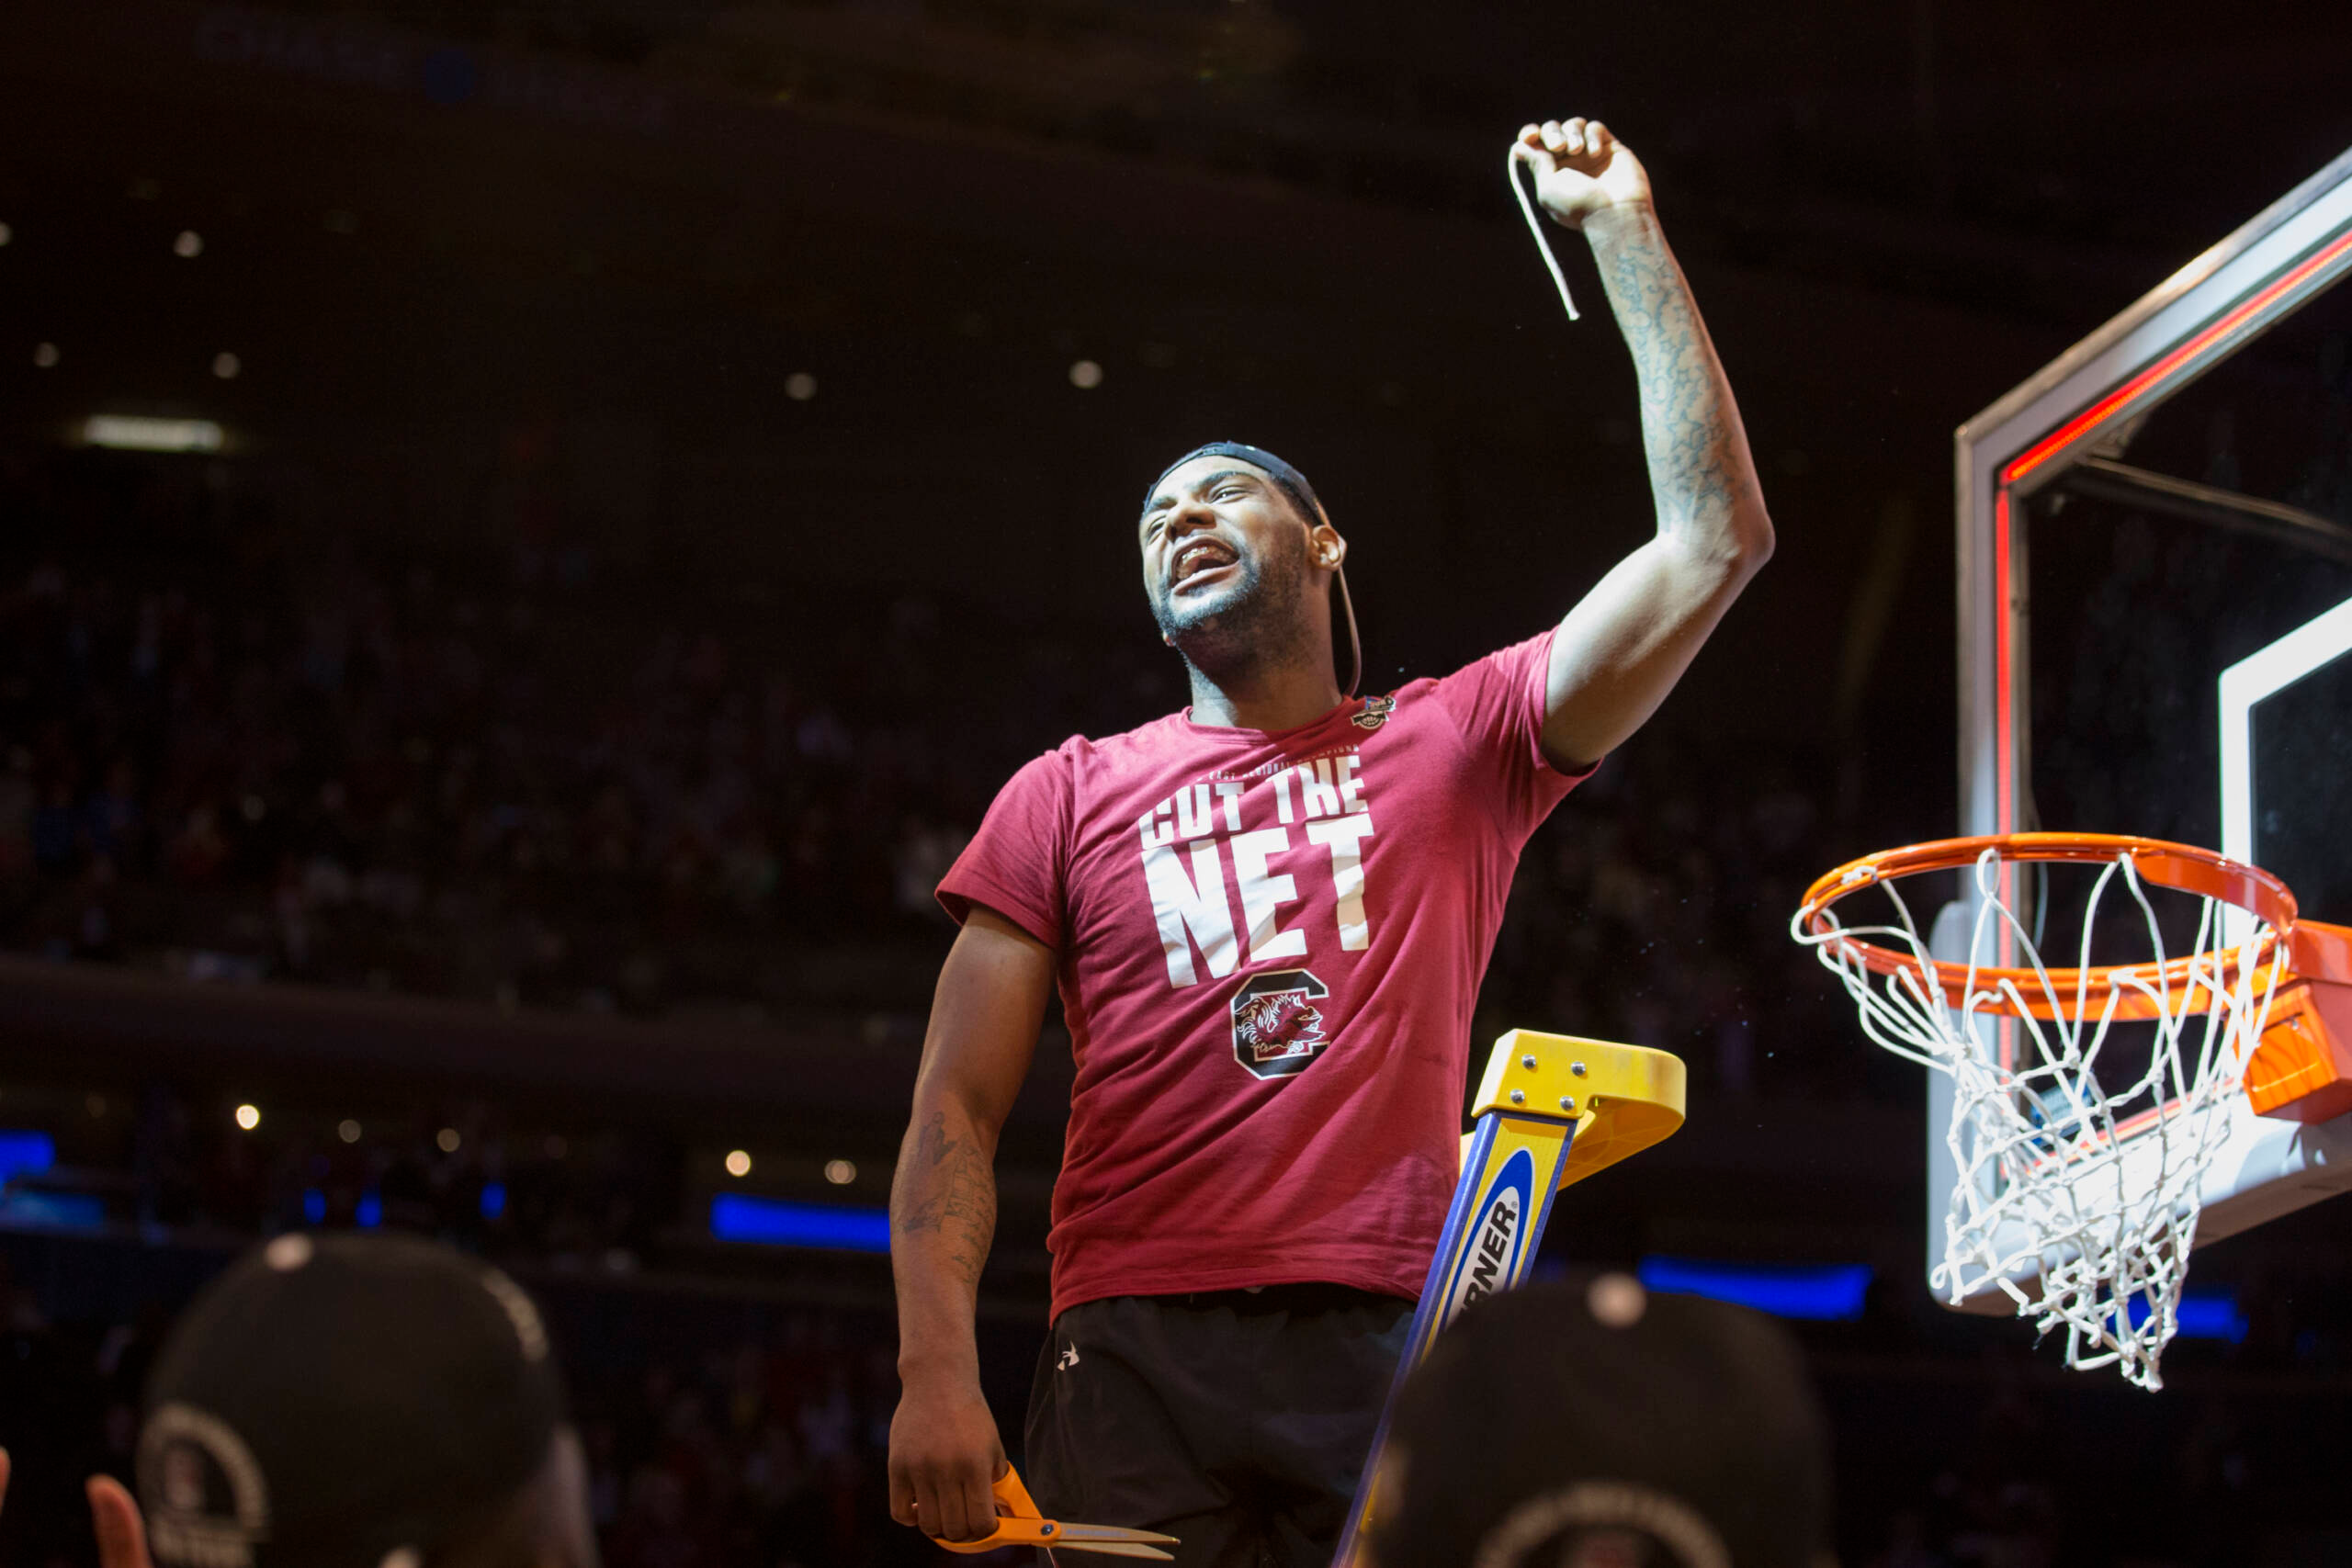 Thornwell Named First Team All-American By CBS Sports